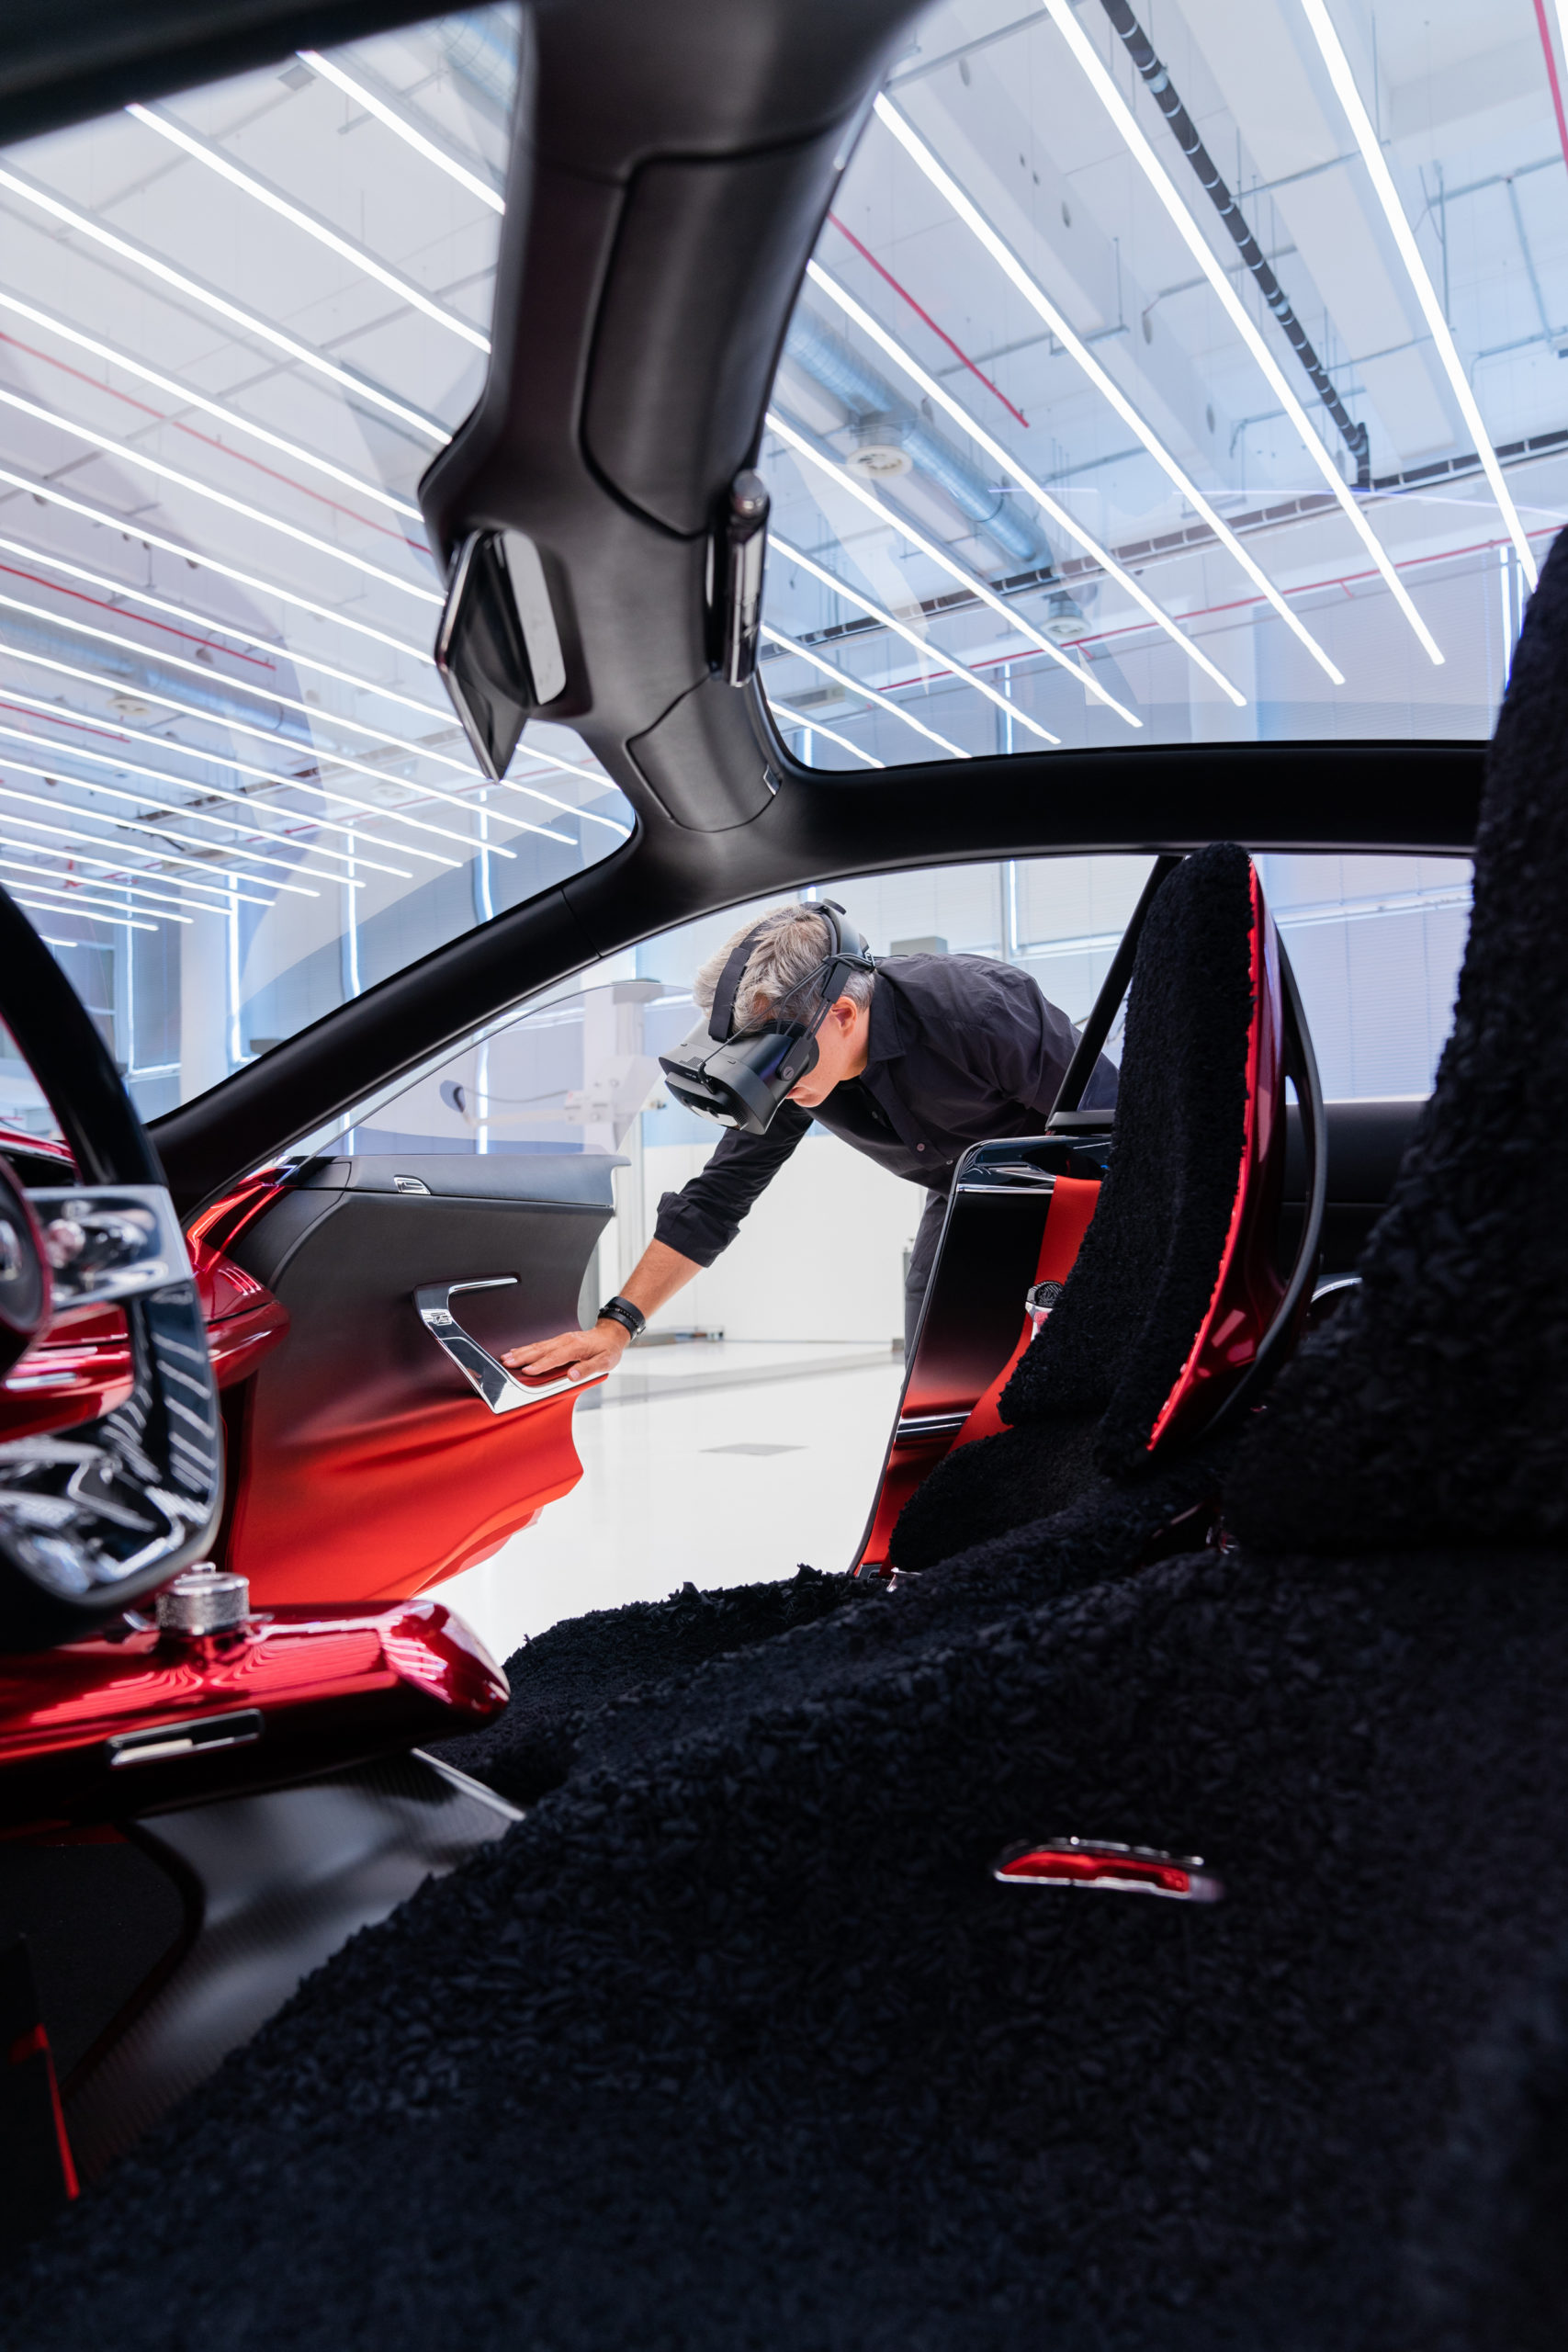 Varjo, KIA, NVIDIA and Autodesk are merging digital and physical worlds for automotive design